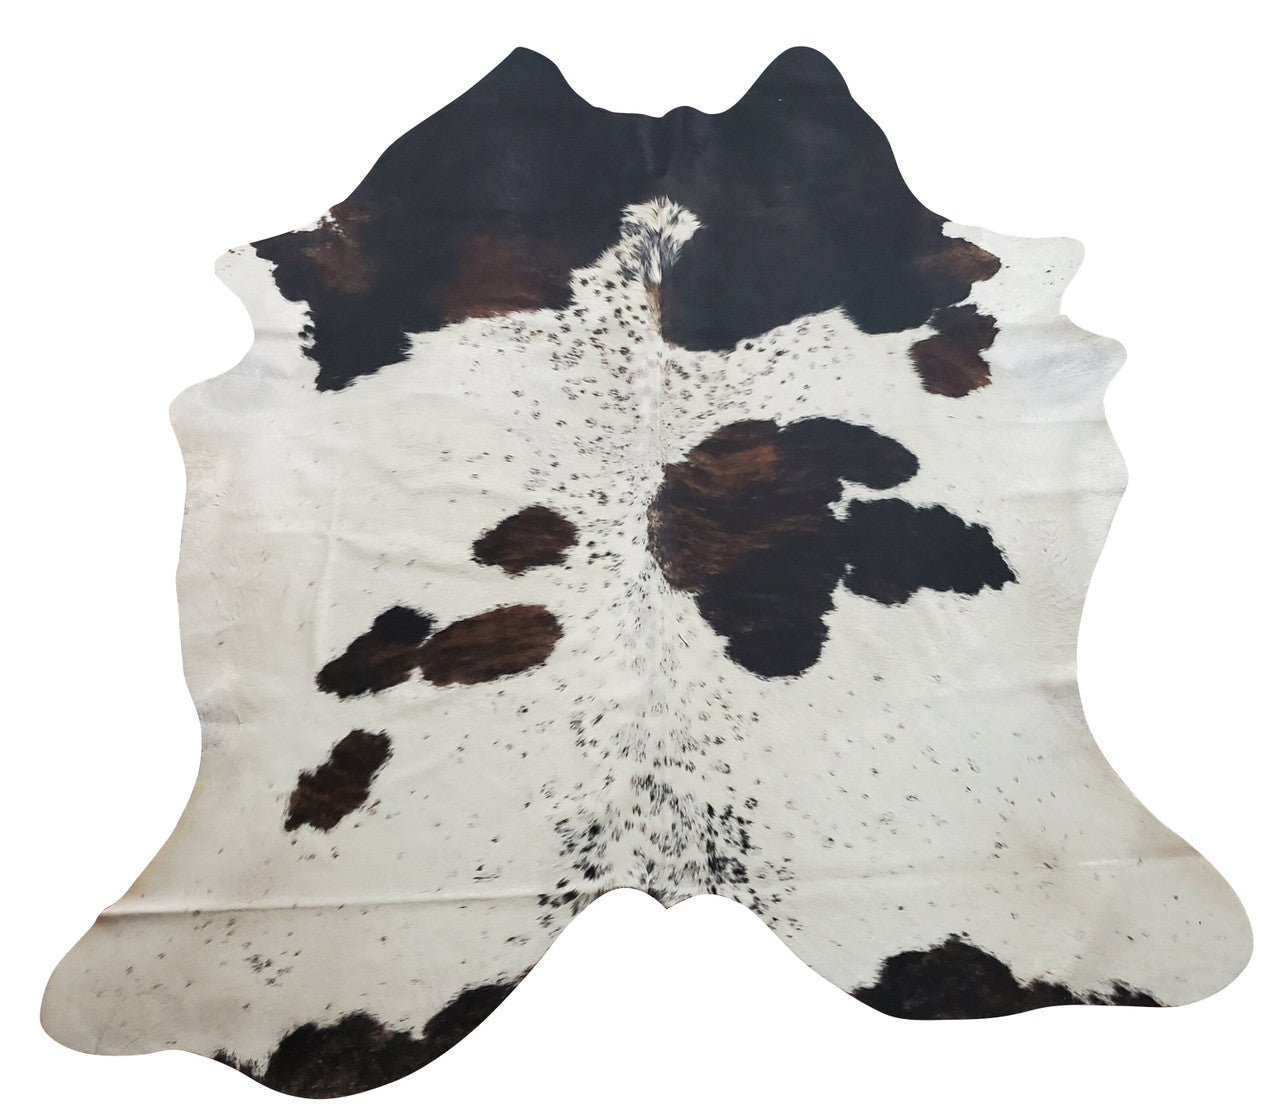 If you are planning to add a tri color cowhide rug in your living room or your office, whether it's rustic or chic, look no further